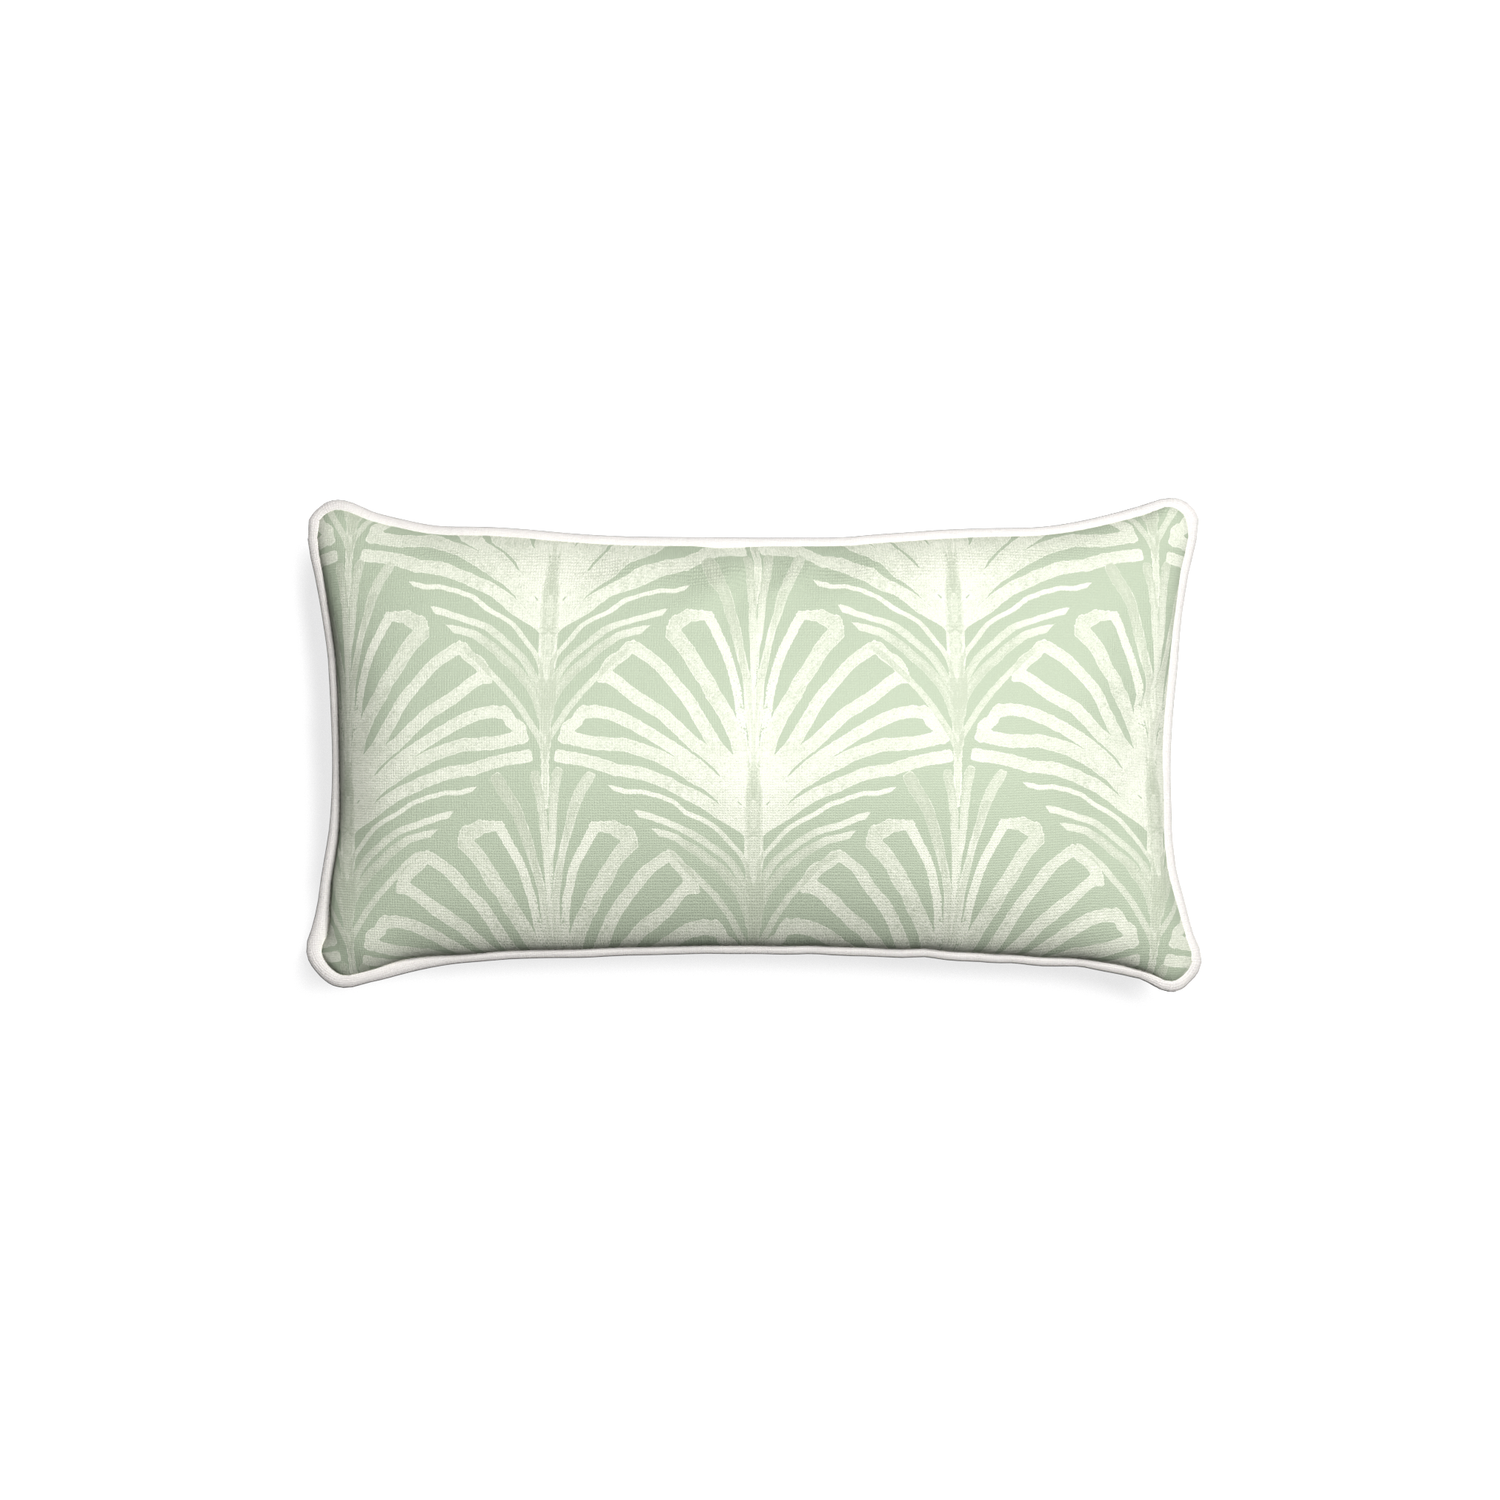 Petite-lumbar suzy sage custom sage green palmpillow with snow piping on white background